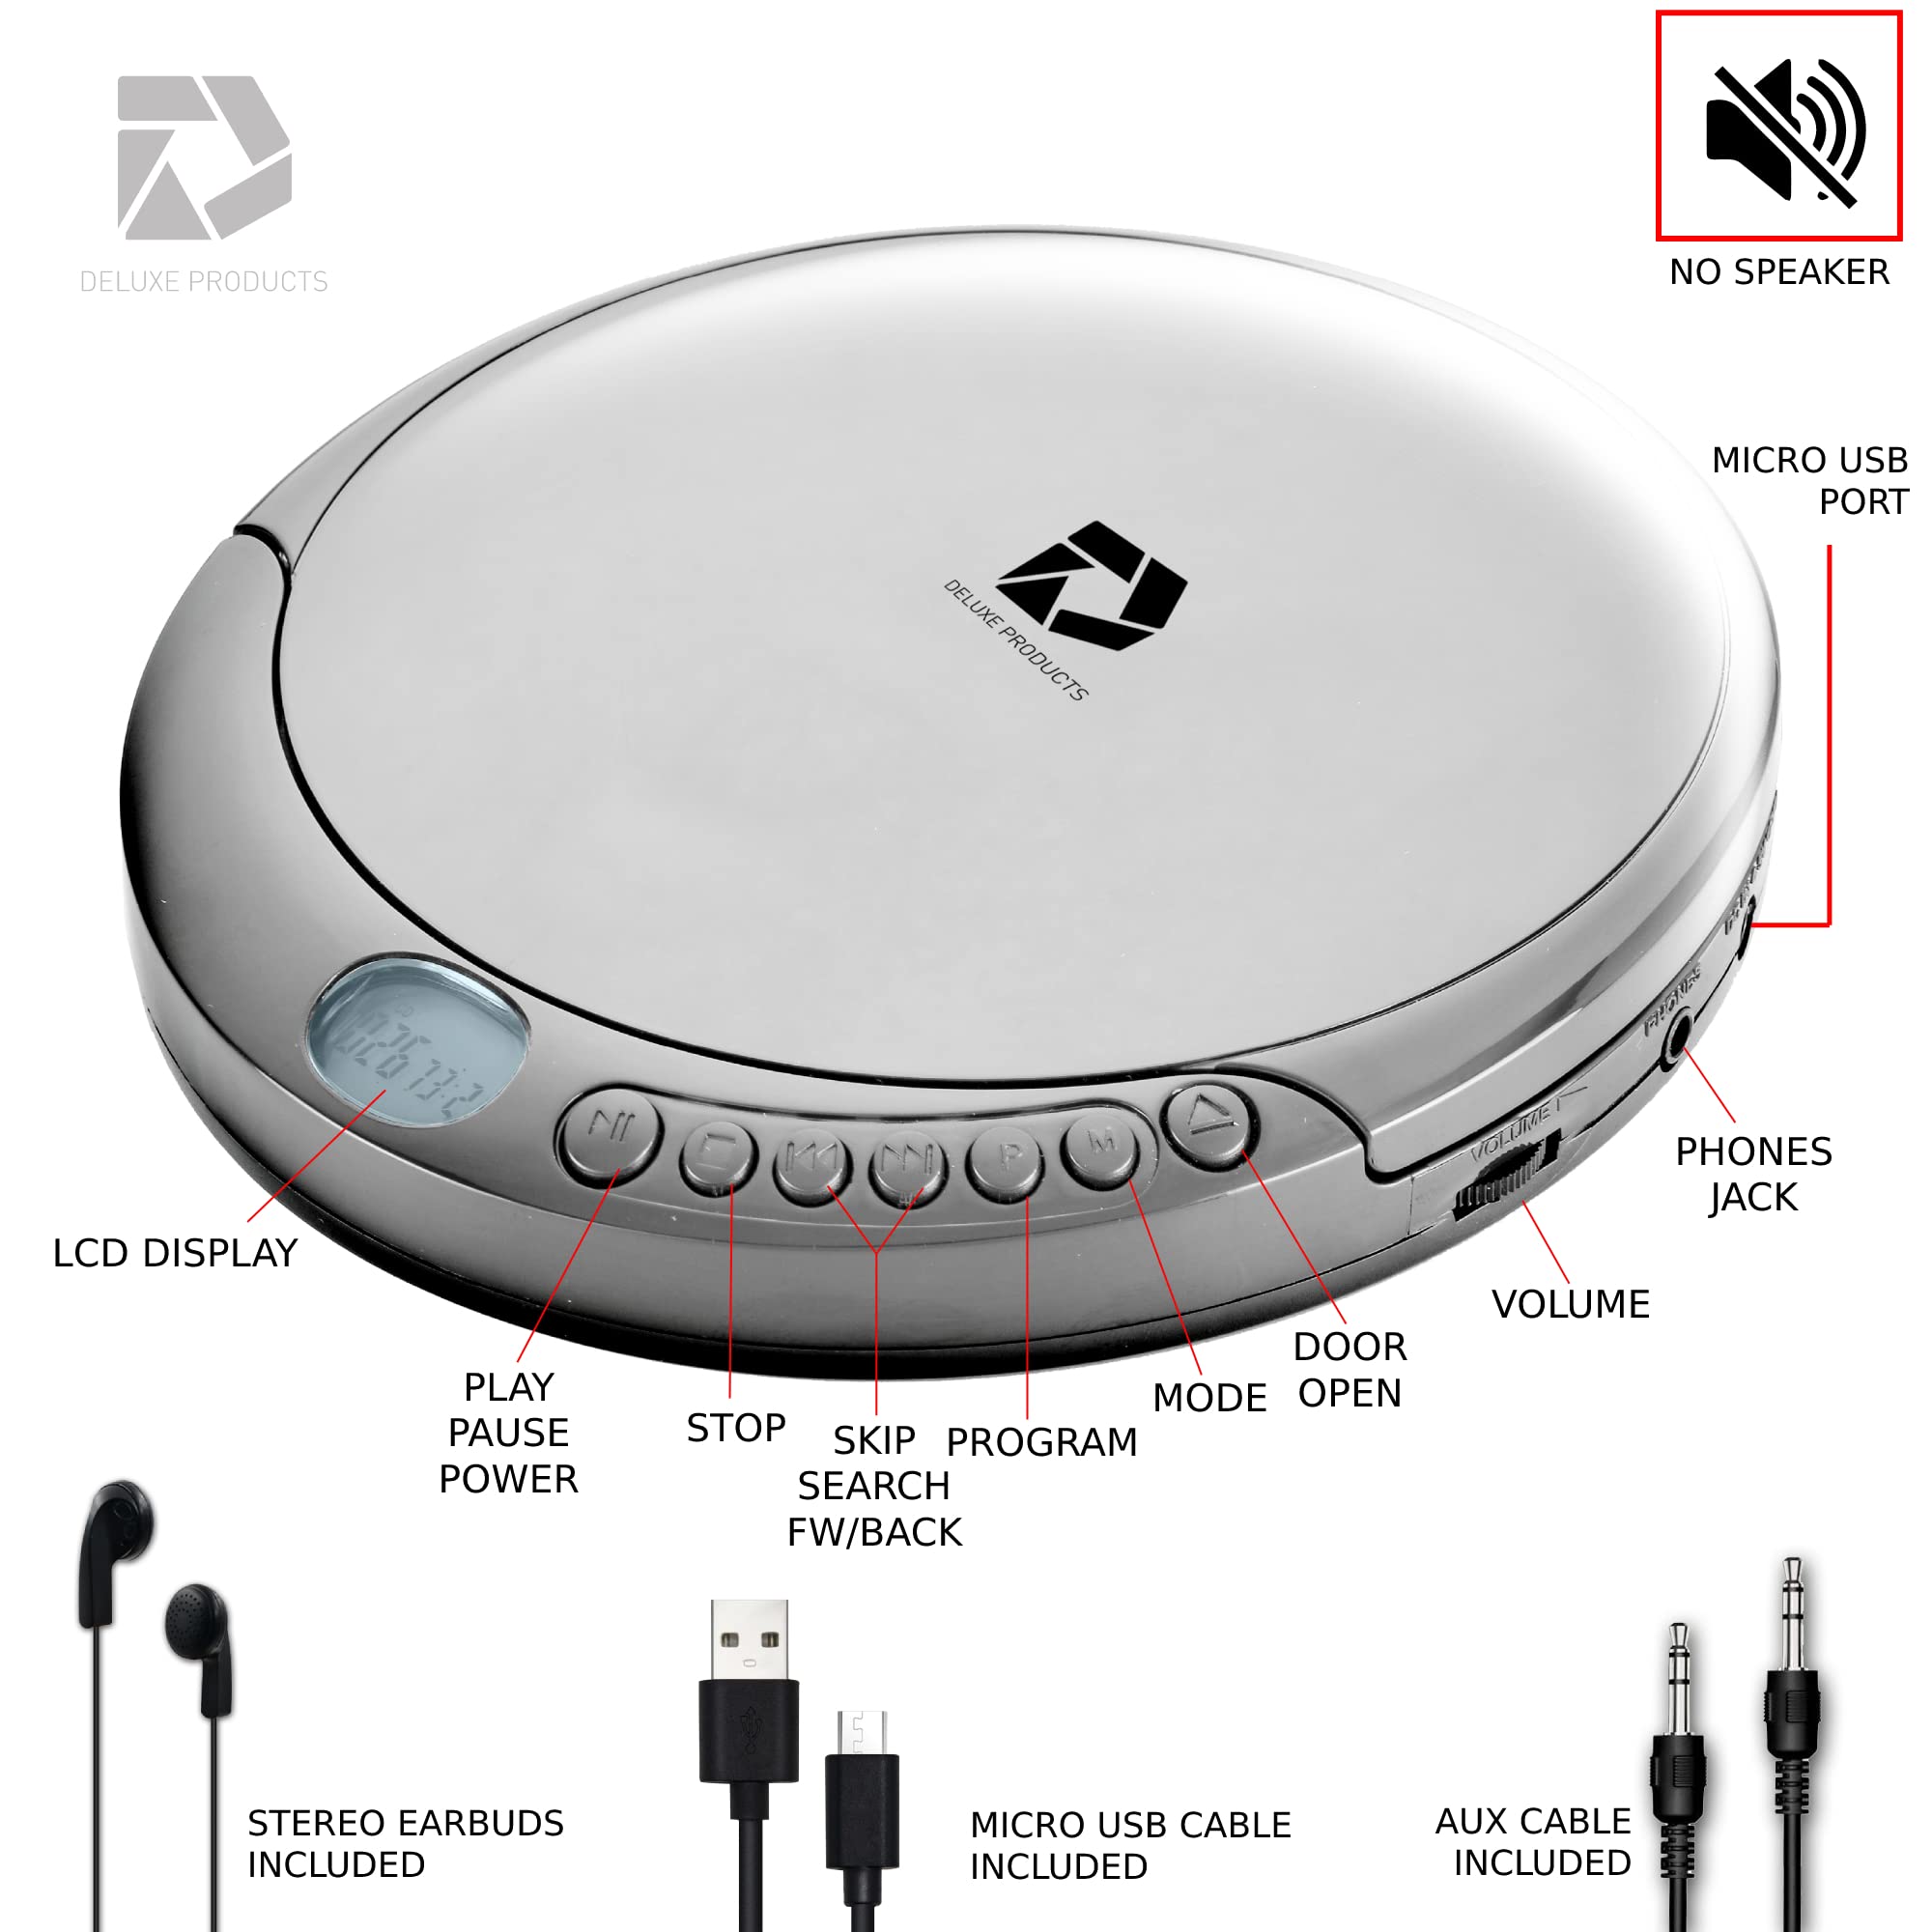 Deluxe Products CD Player Portable with 60 Second Anti Skip, Stereo Earbuds, Includes Aux in Cable and AC USB Power Cable for use at Home or in Car. Silver